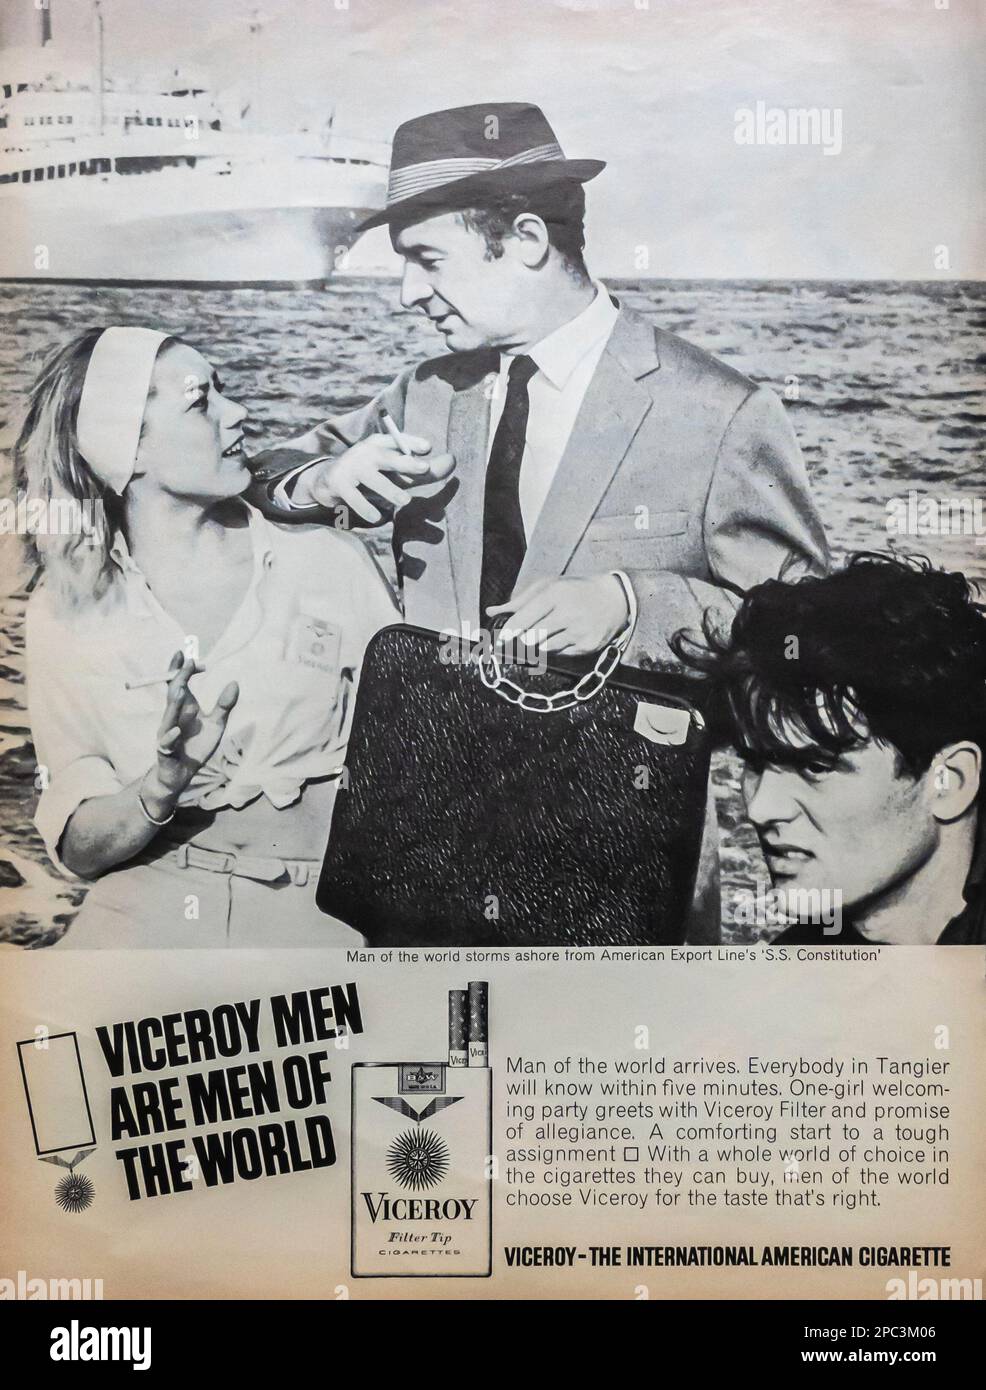 Viceroy advert in Life magazine June 15, 1964 Stock Photo